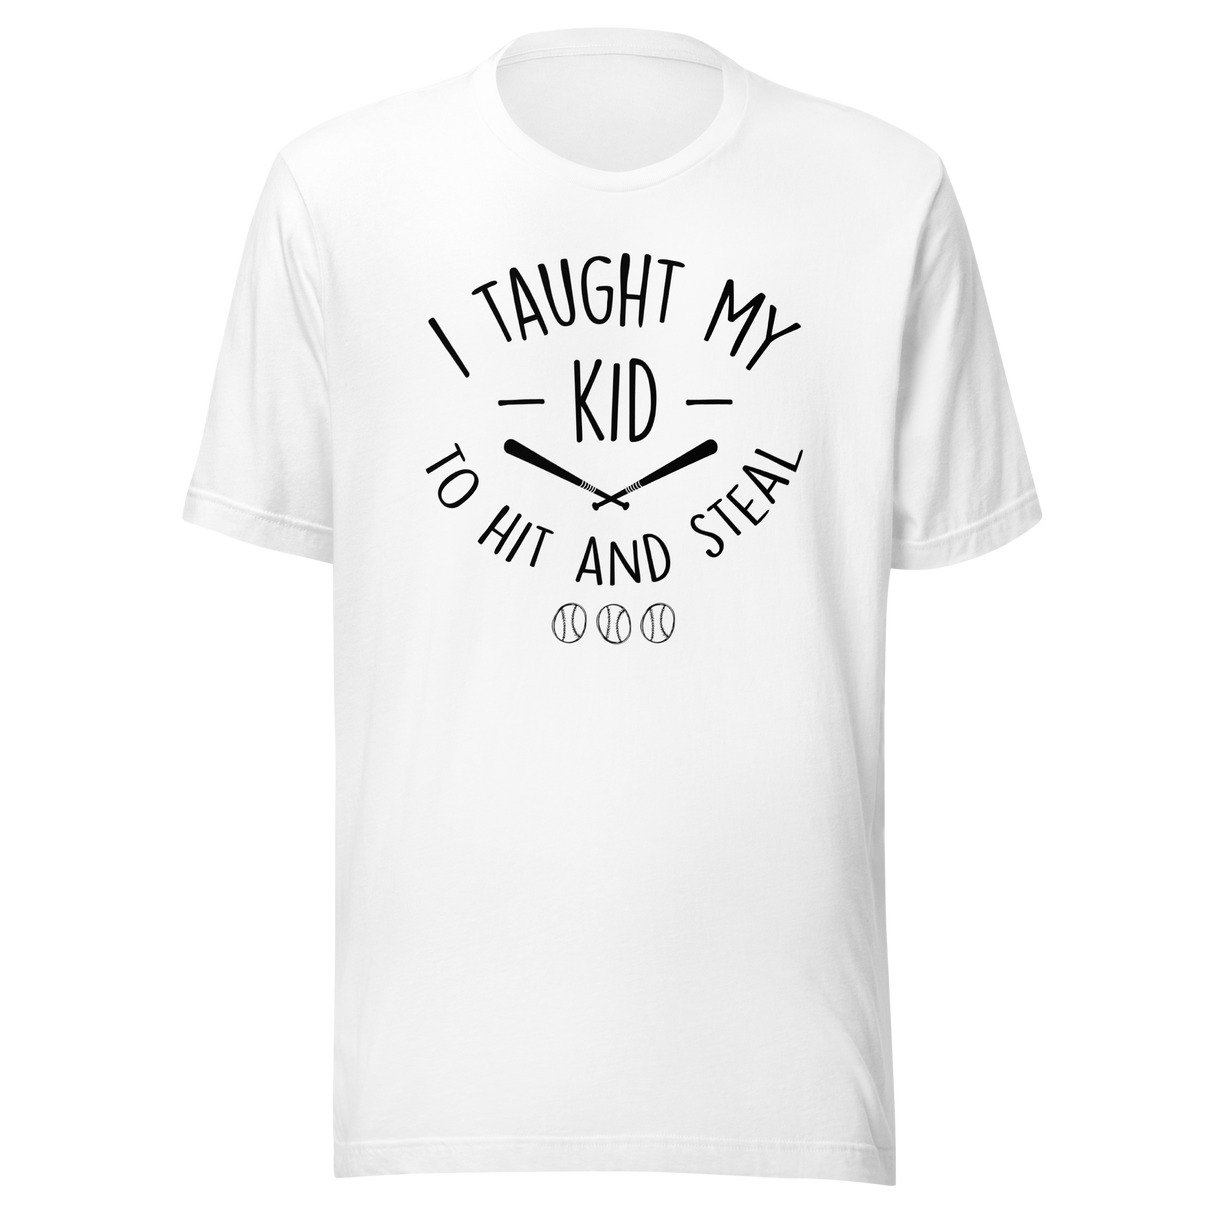 i-teach-my-kid-to-hit-and-steal-sports-tee-baseball-t-shirt-parenting-tee-humor-t-shirt-coaching-tee-1#color_white